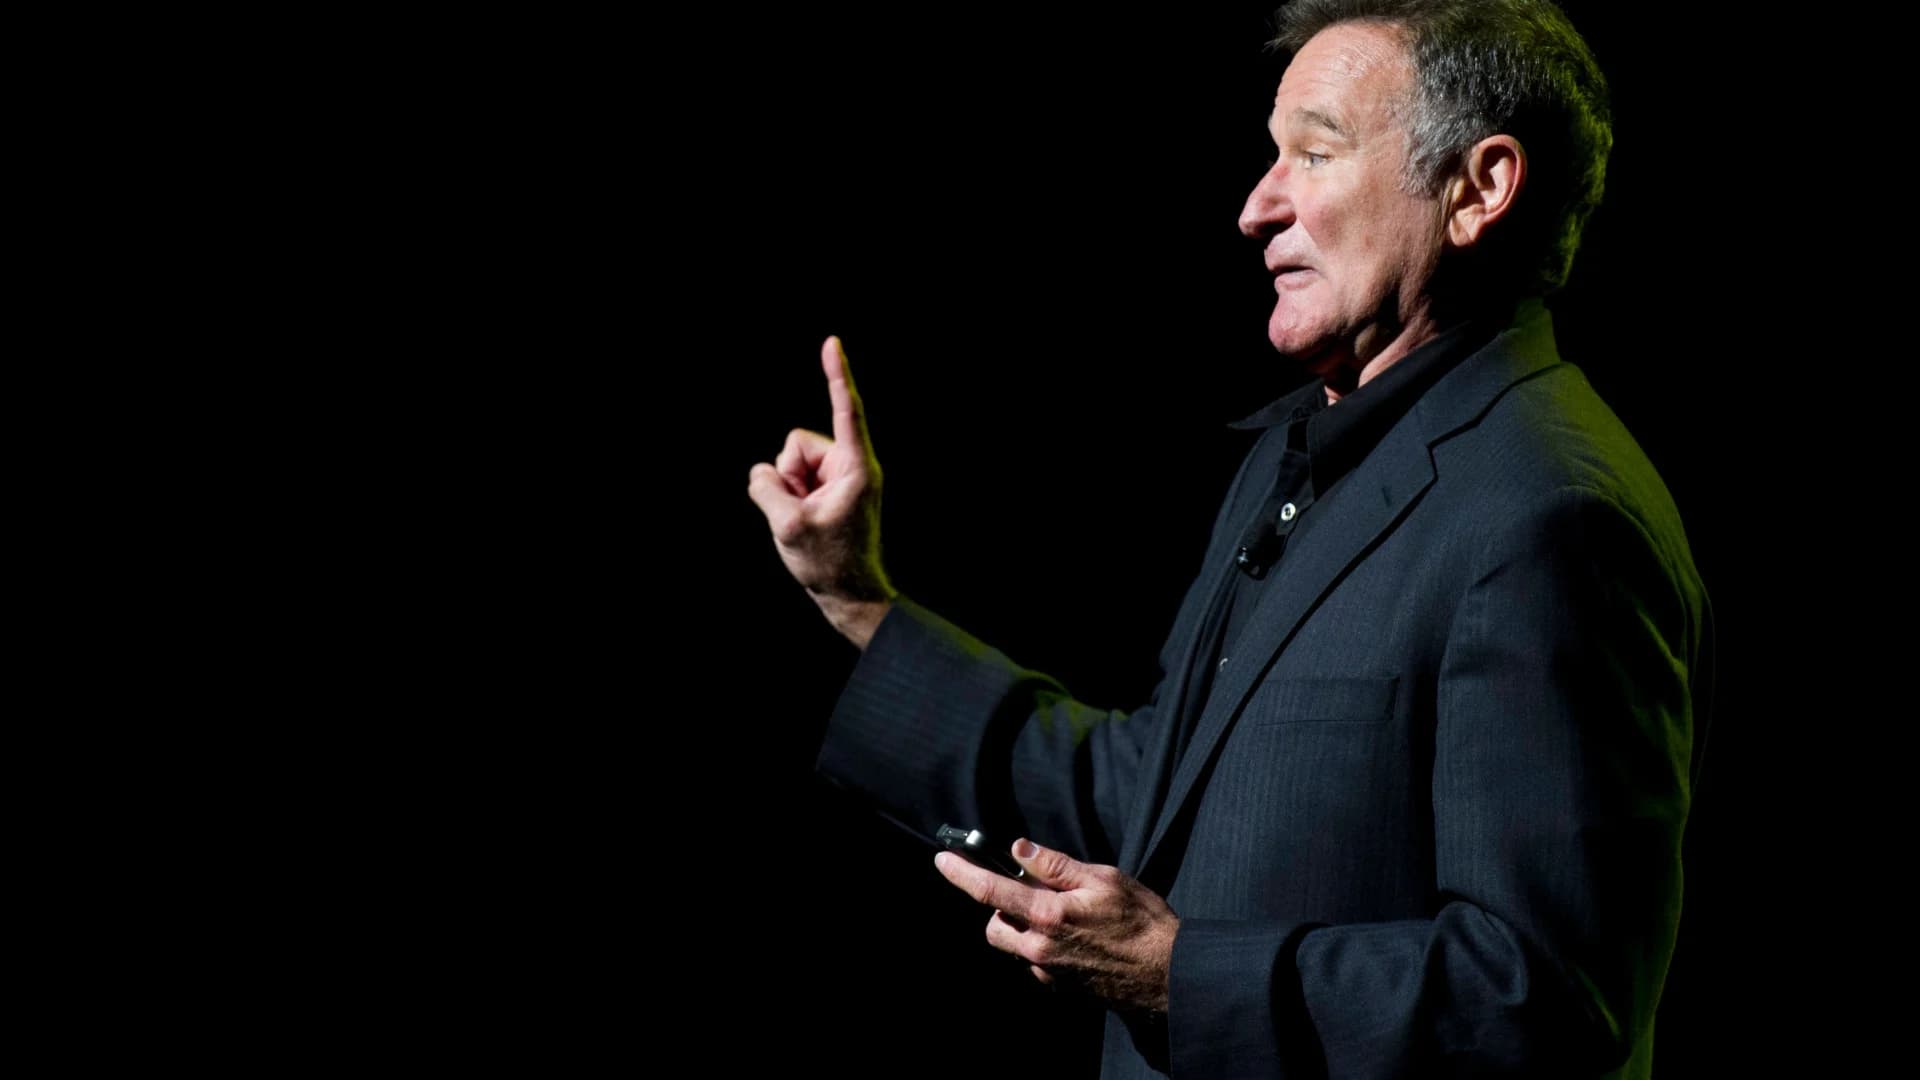 Estate of Robin Williams launches YouTube channel for late icon